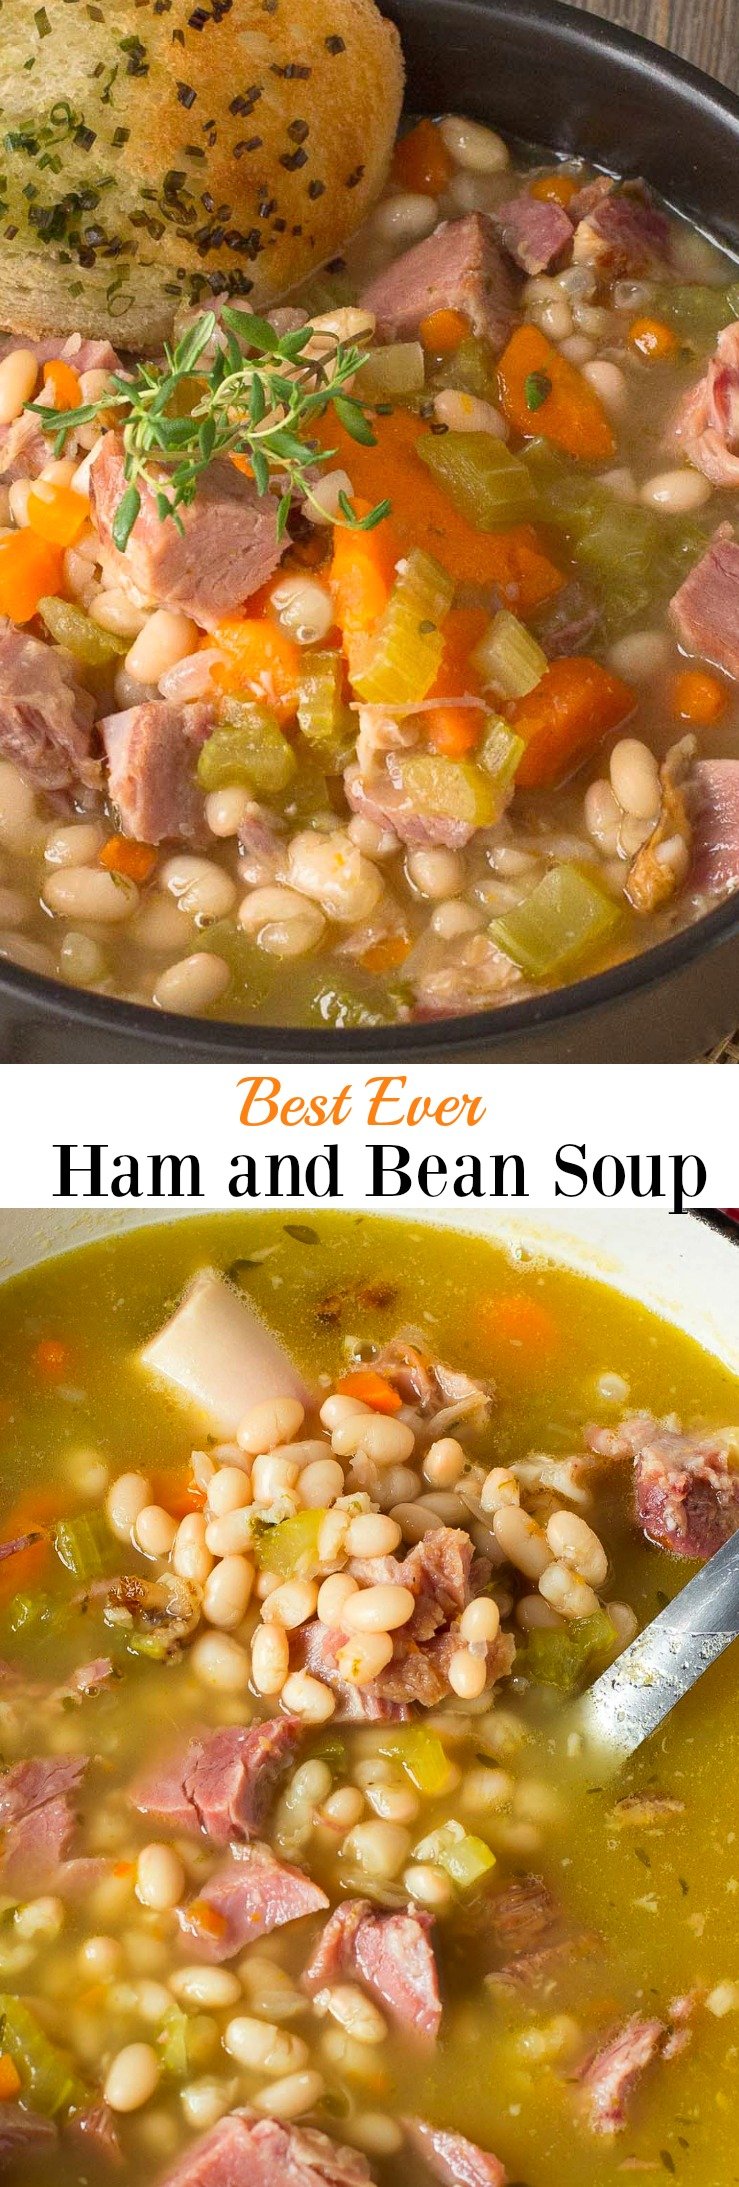 A Best Ever recipe for Ham and Bean Soup! An all-time favourite recipe for leftover ham, so hearty and delicious. via @artandthekitch